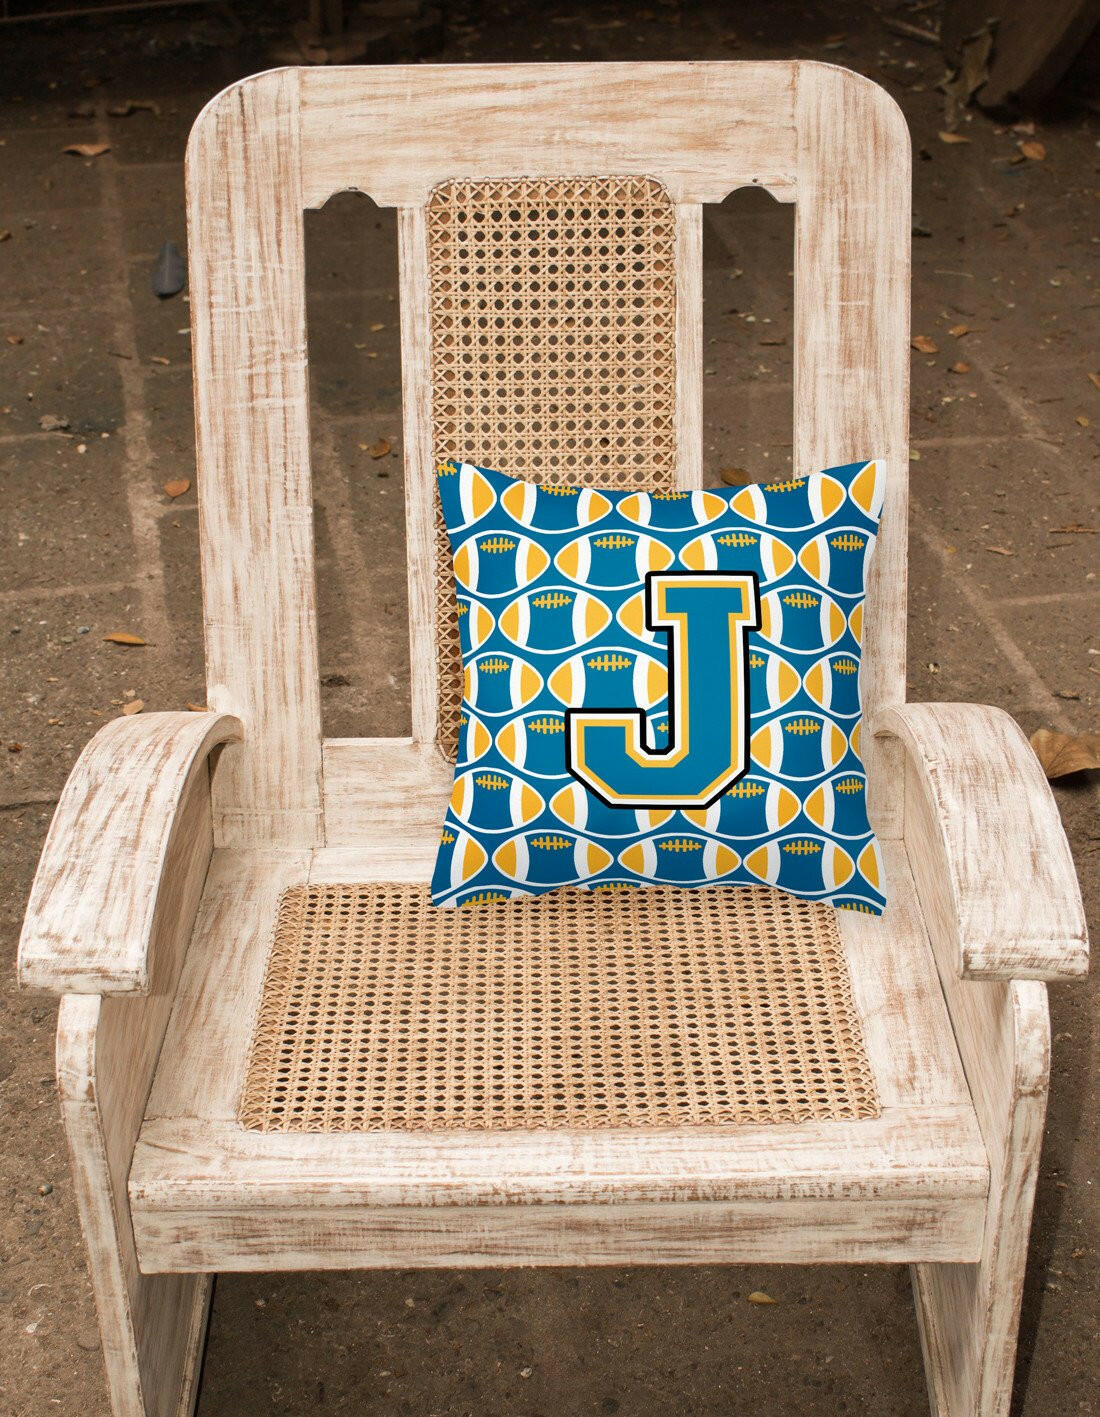 Letter J Football Blue and Gold Fabric Decorative Pillow CJ1077-JPW1414 by Caroline's Treasures